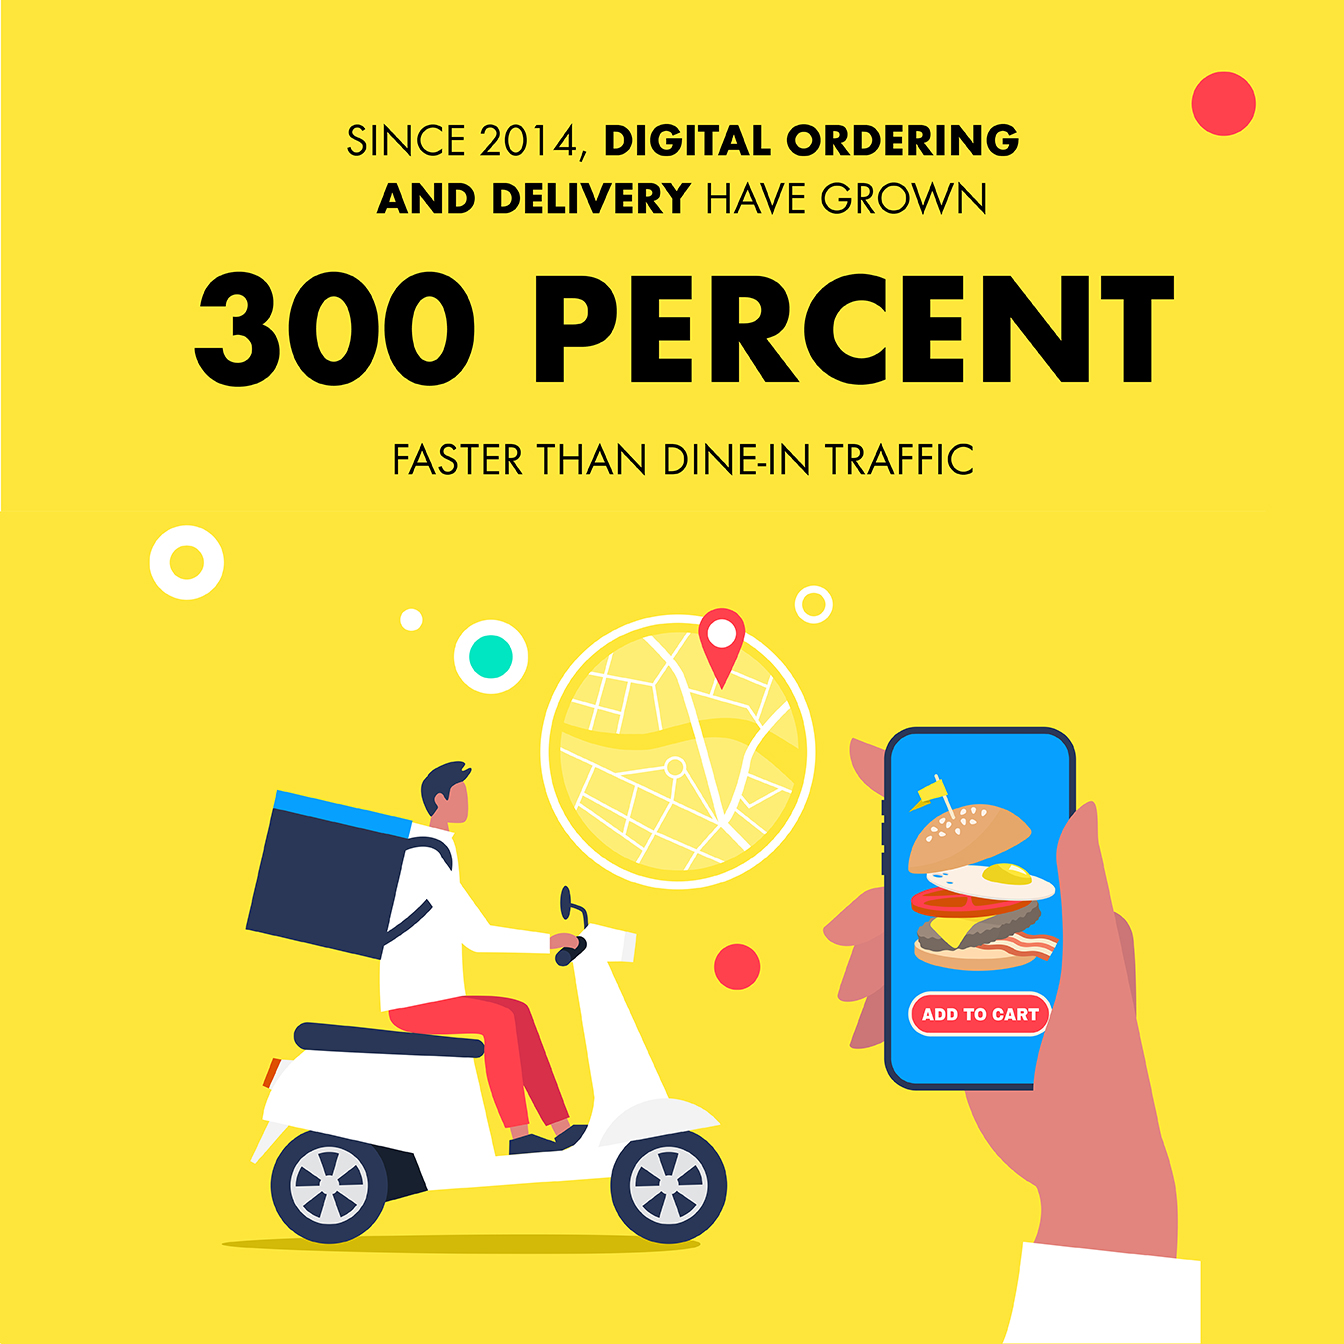 Since 2014, digital ordering and delivery have grown 300 percent faster than dine-in traffic.